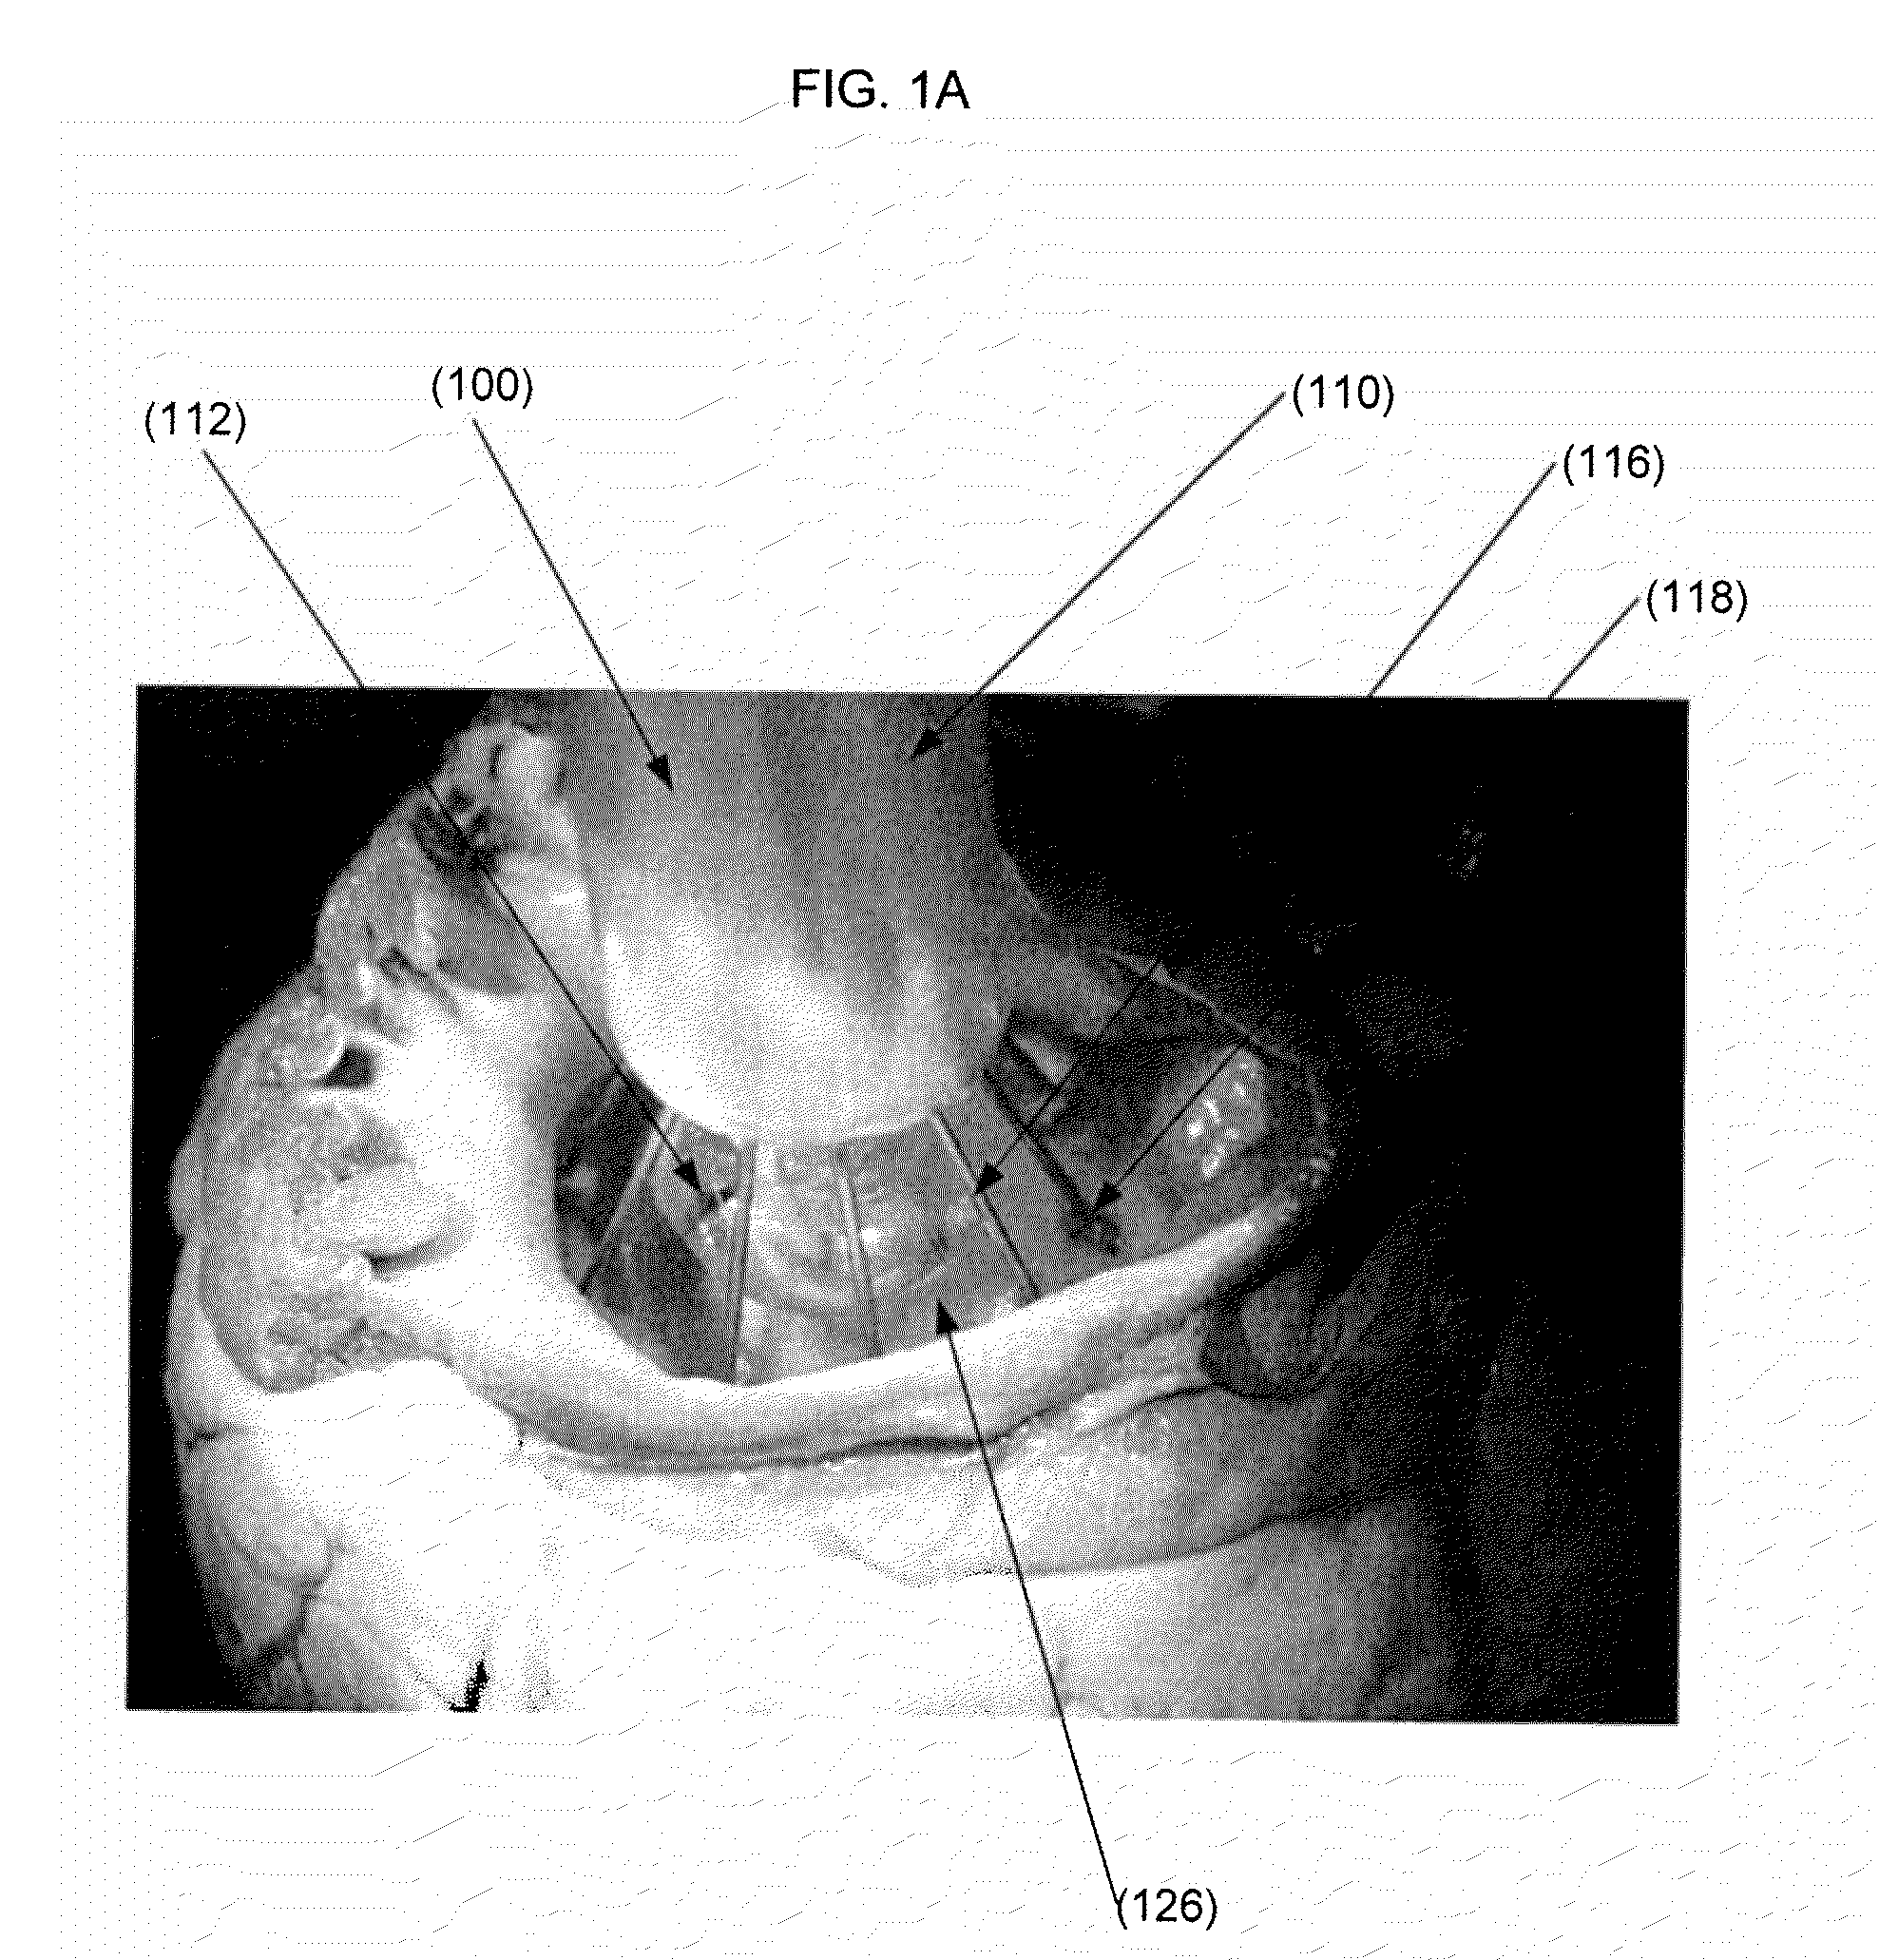 Inflatable minimally invasive system for delivering and securing an annular implant